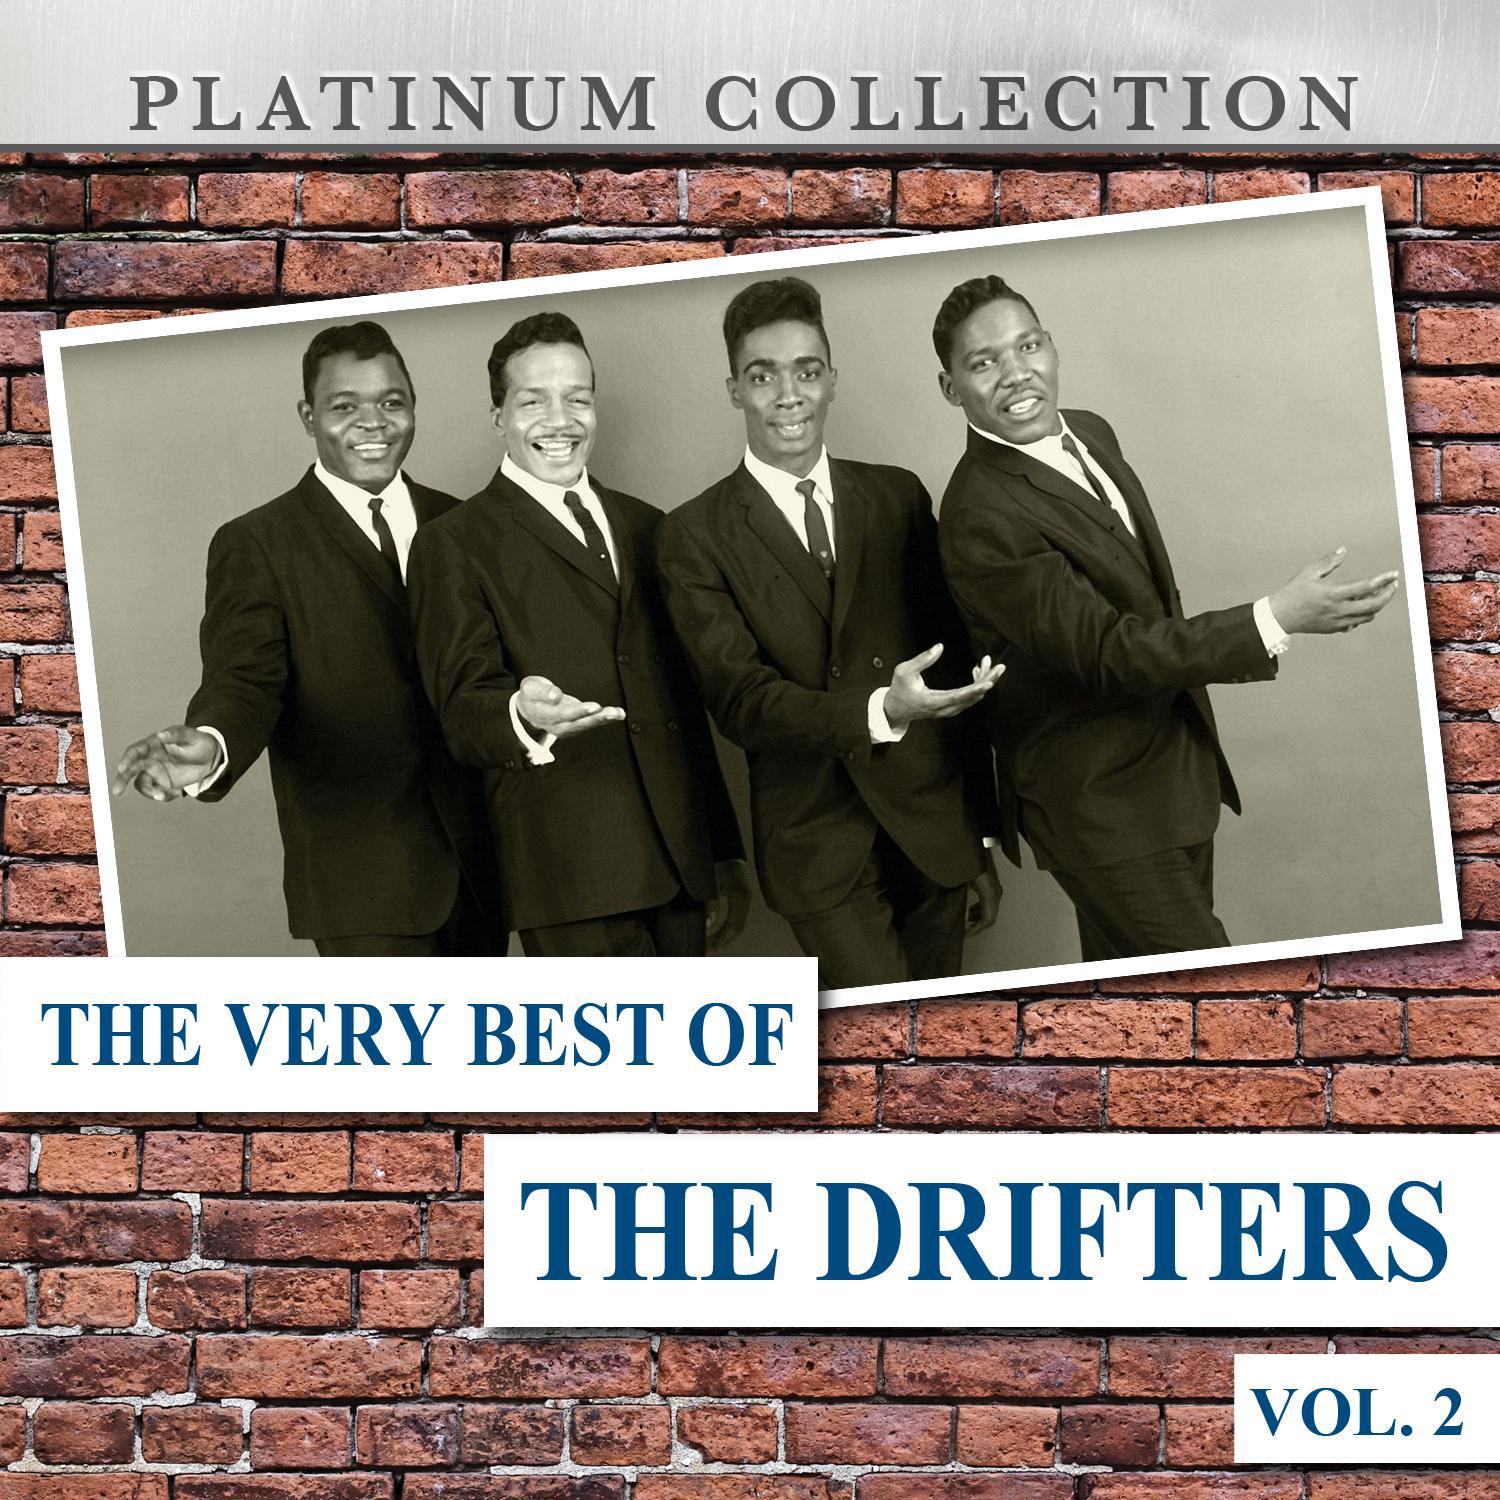 The Very Best of The Drifters Vol. 2